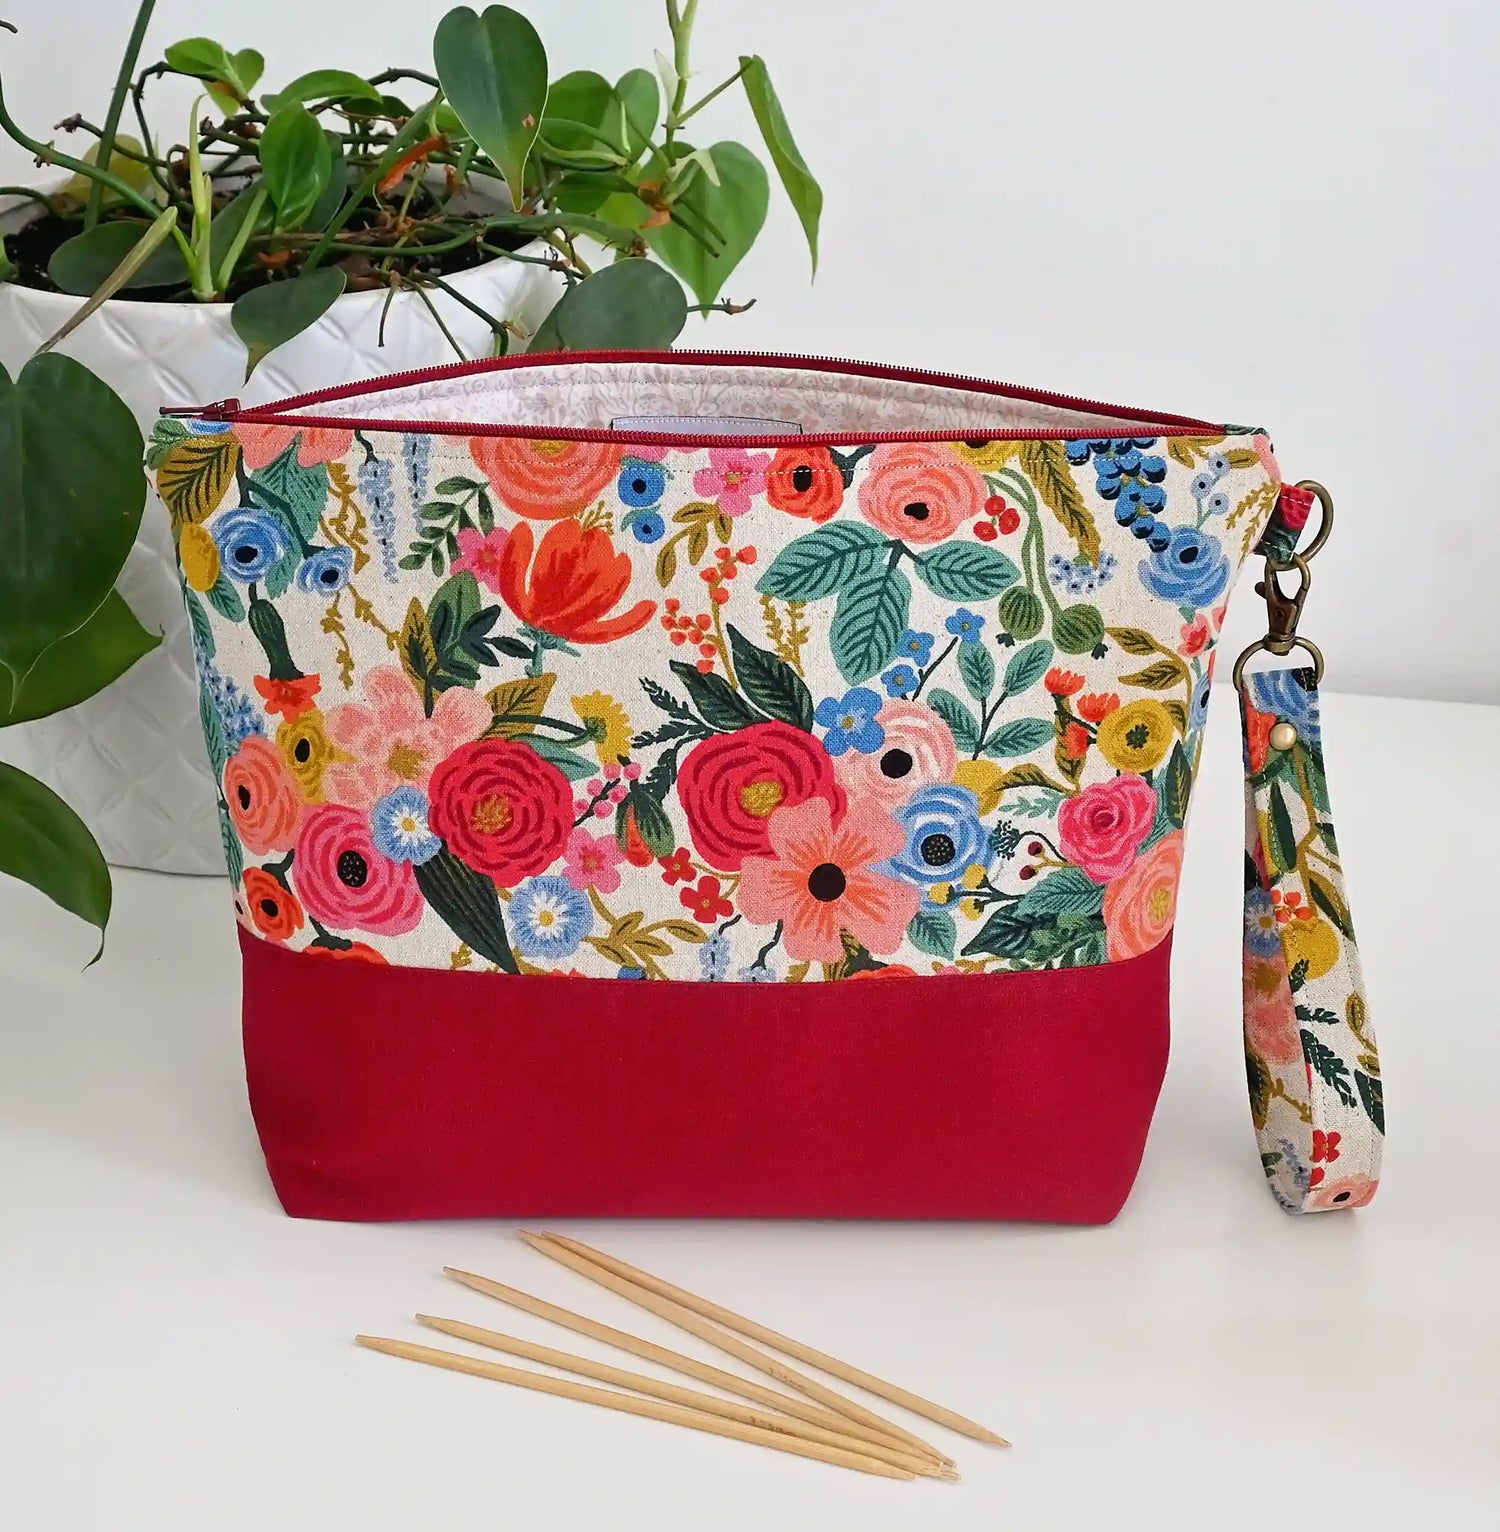 Gorgeous Garden Party canvas project bag with pockets and a removable wrist strap.  Made in Canada by Yellow Petal Handmade.